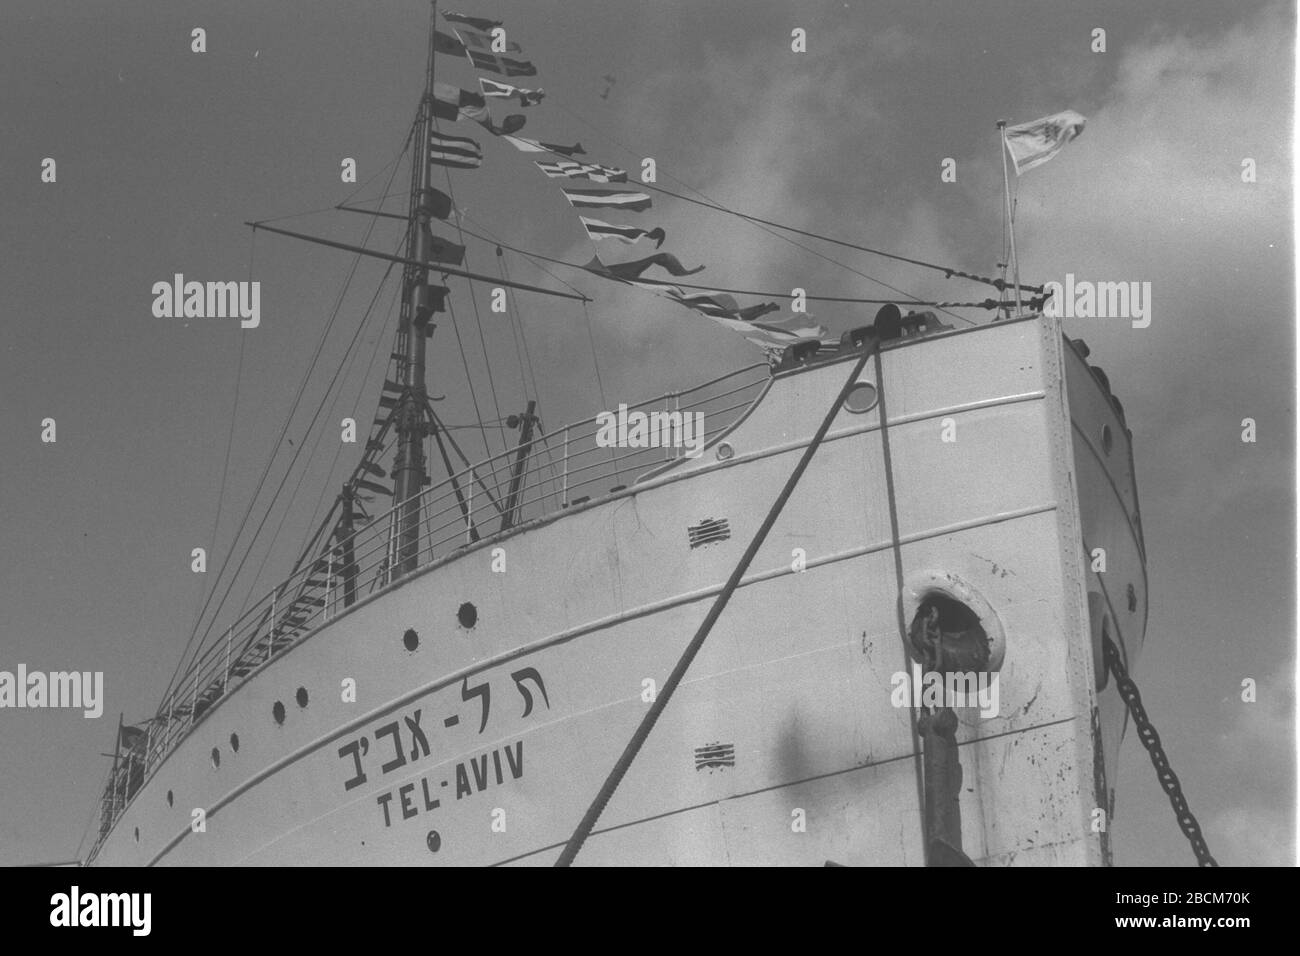 English The 3700 Ton Passenger Steamer Tel Aviv Of The Palestine Shipping Company On The Day Of The Maiden Voyage From Haifa Port To Trieste I C Ss E I O O I I O U U E E O E C U O E